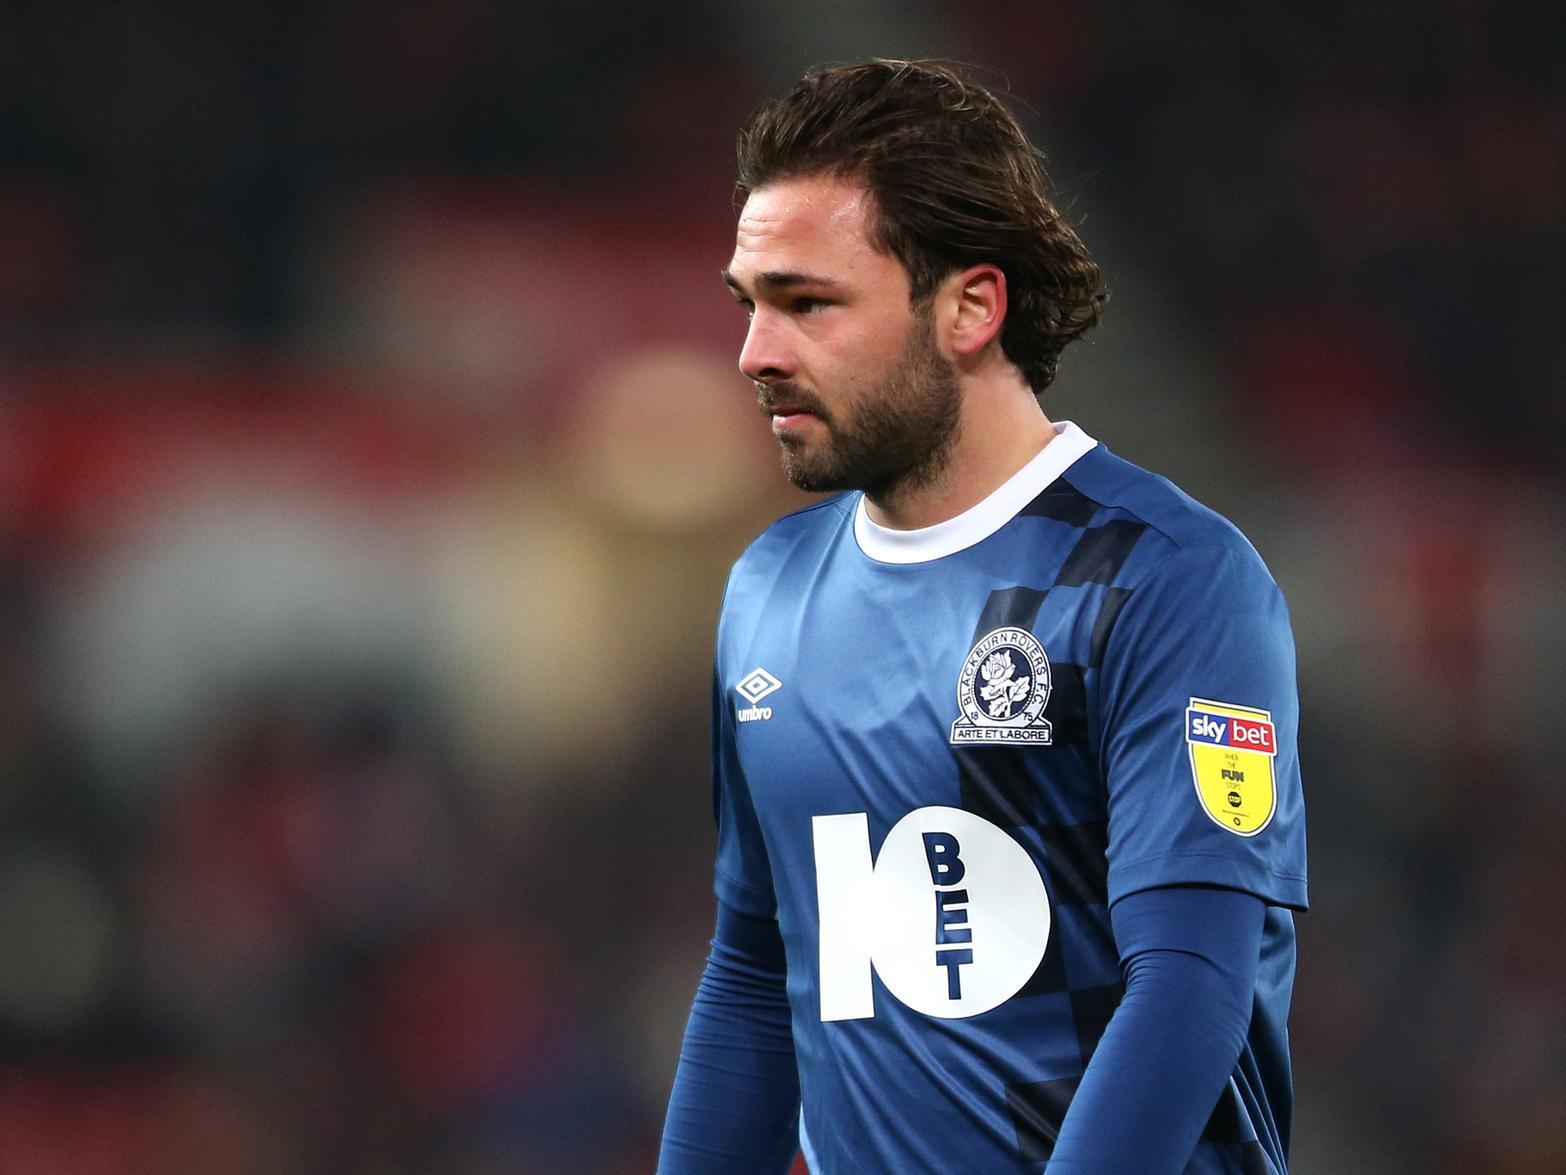 Blackburn Rovers' play-off hopes have been rock by a serious knee injury to their talisman Bradley Dack, who could be out injured for up to a year after Monday's 0-0 draw with Wigan. (BBC Sport)